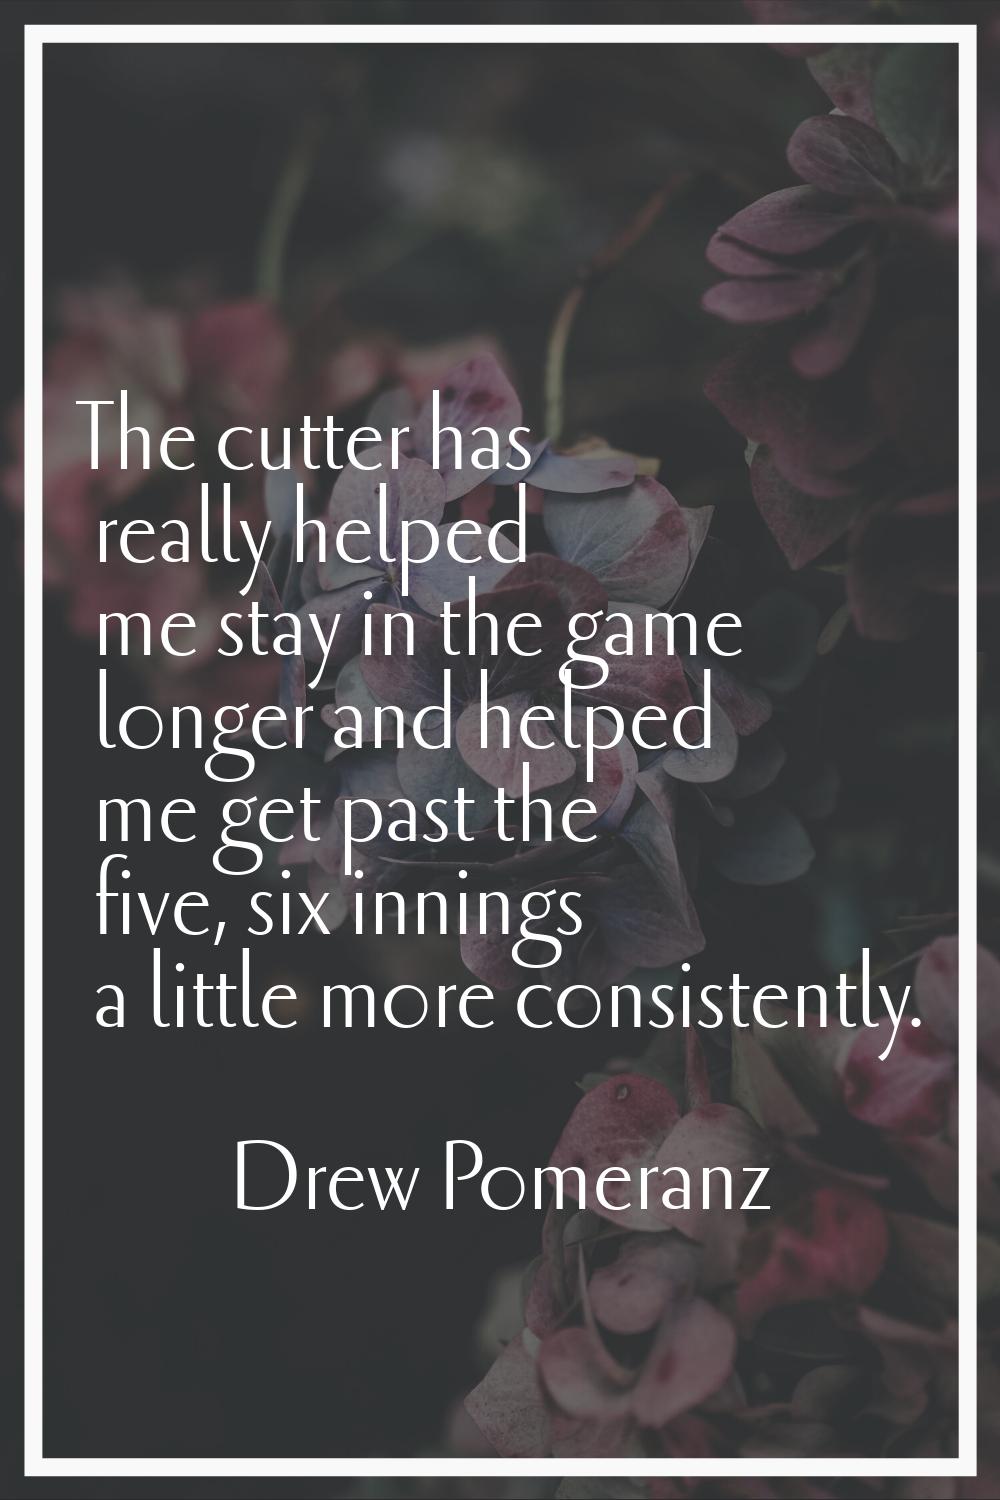 The cutter has really helped me stay in the game longer and helped me get past the five, six inning